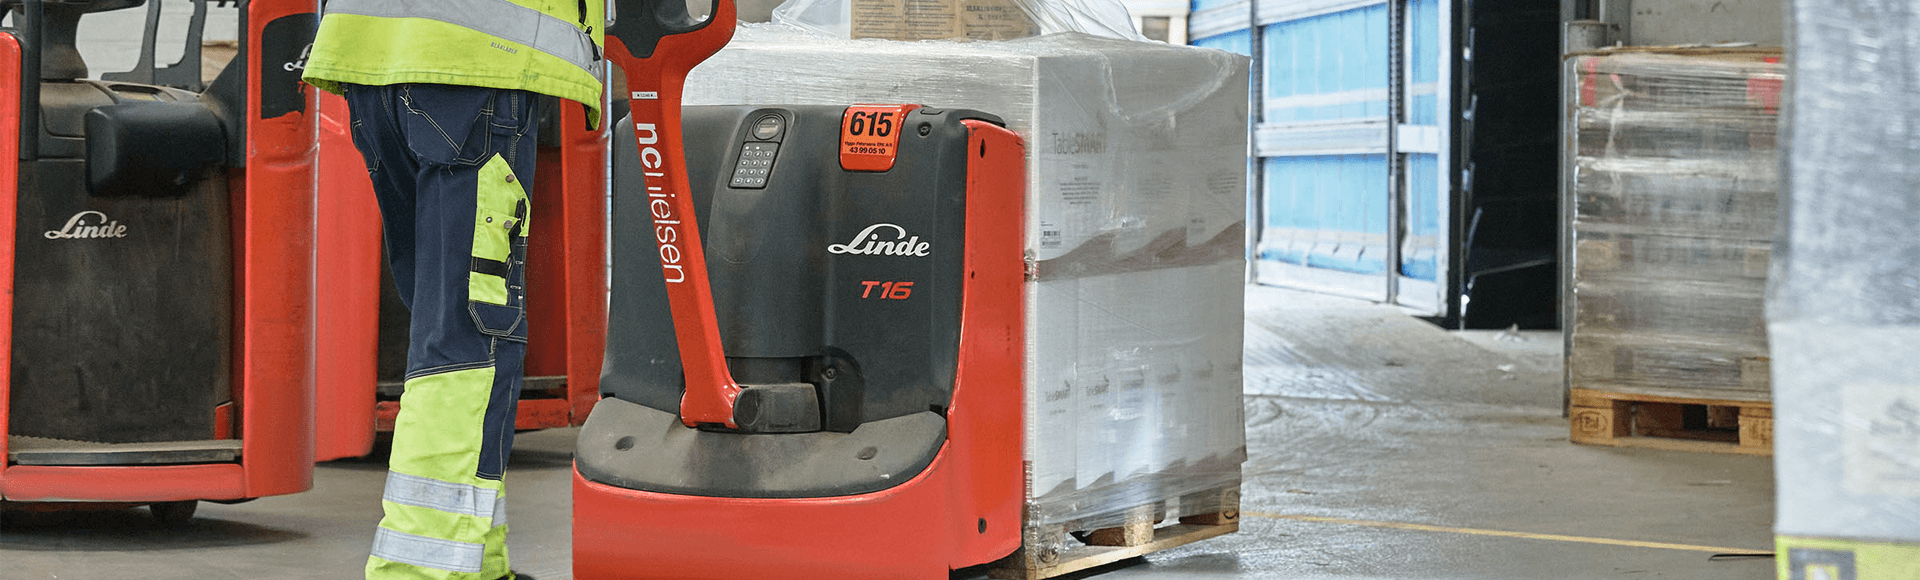 The carrier's preferred choice is Linde